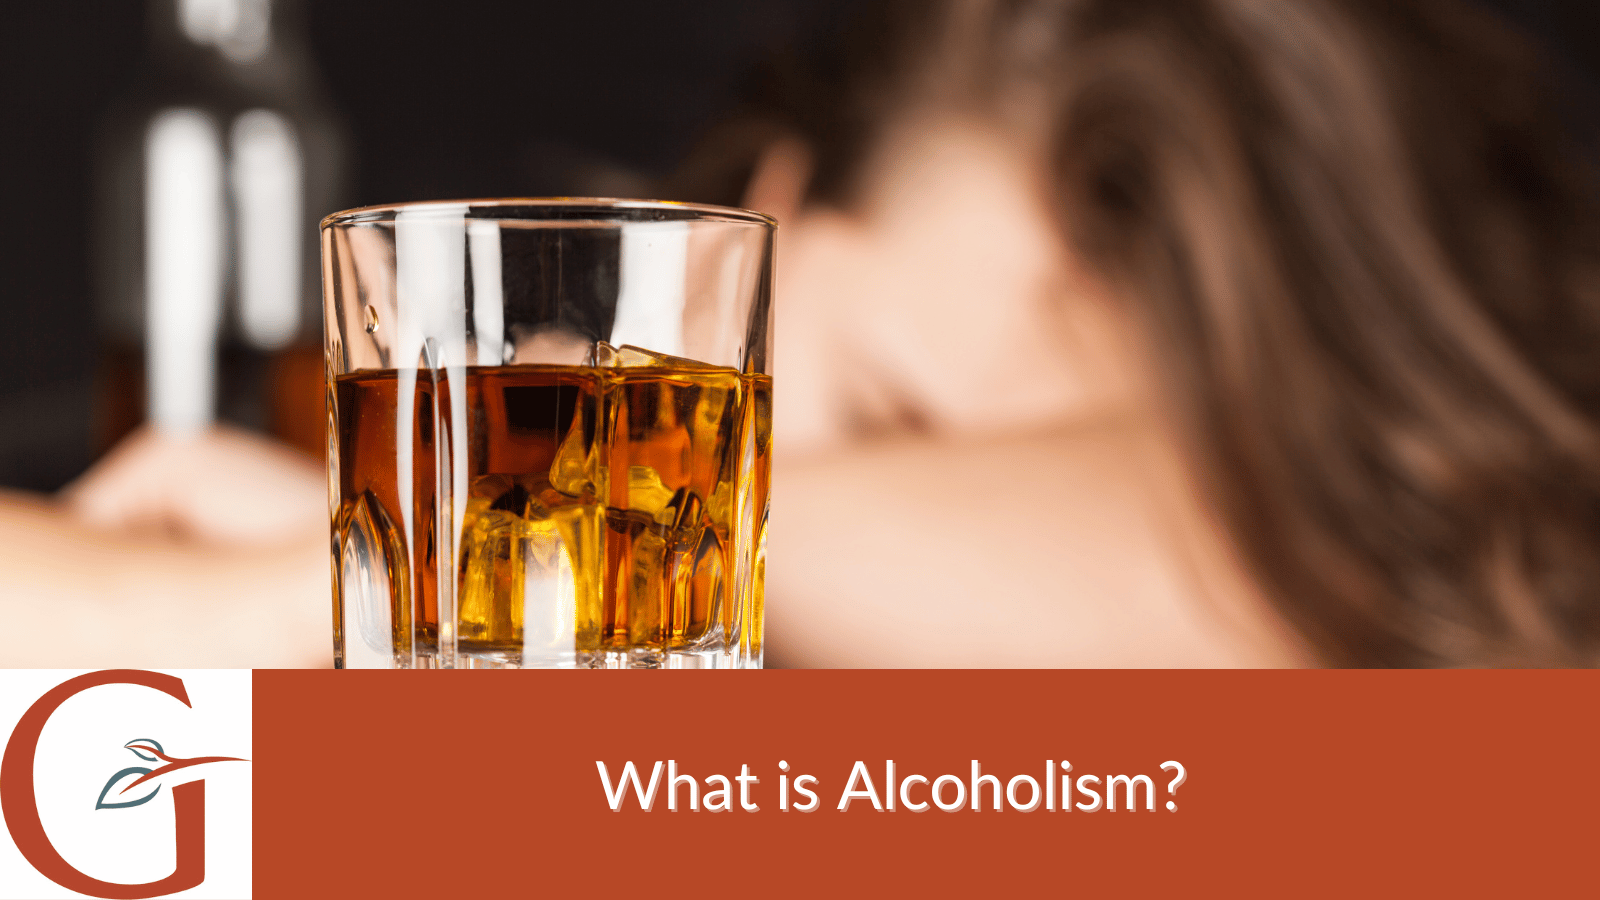 What is alcoholism